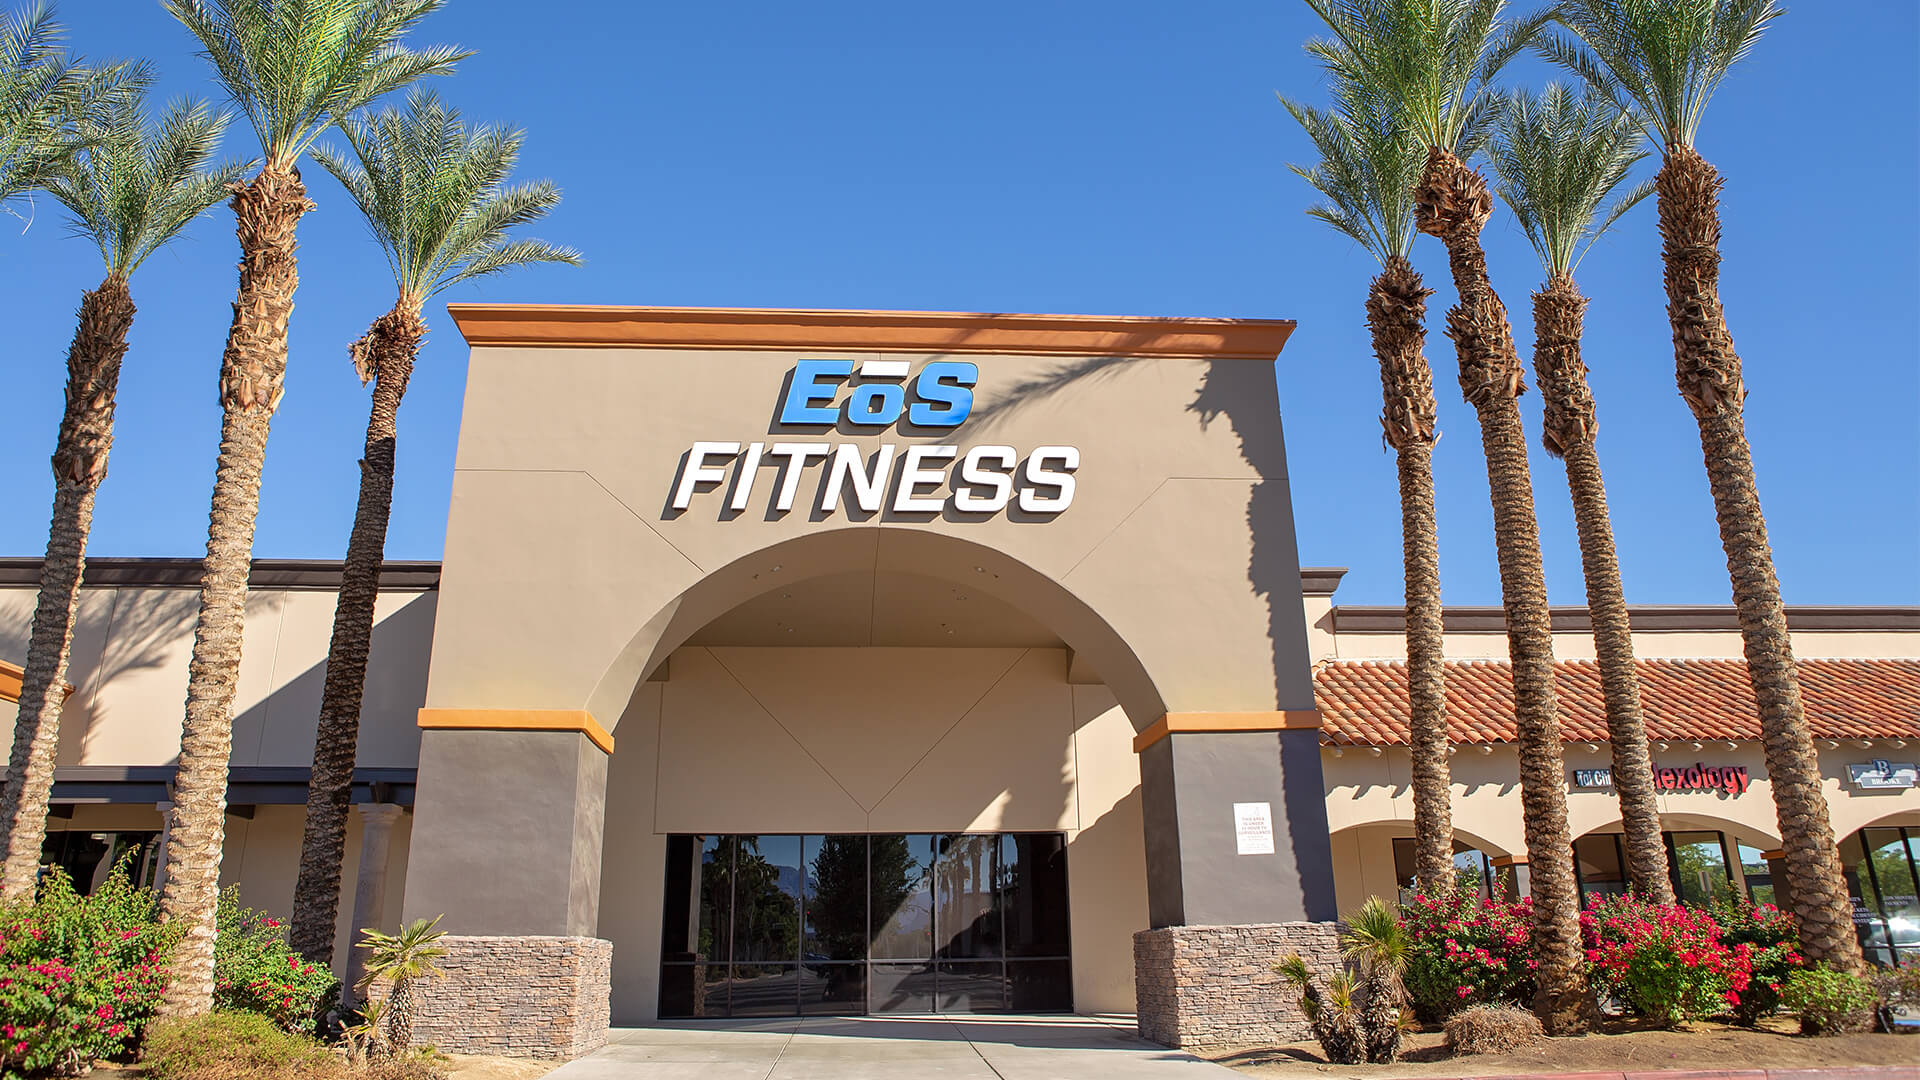 Eos Fitness Palm Desert Ca - All Photos Fitness Tmimages.Org